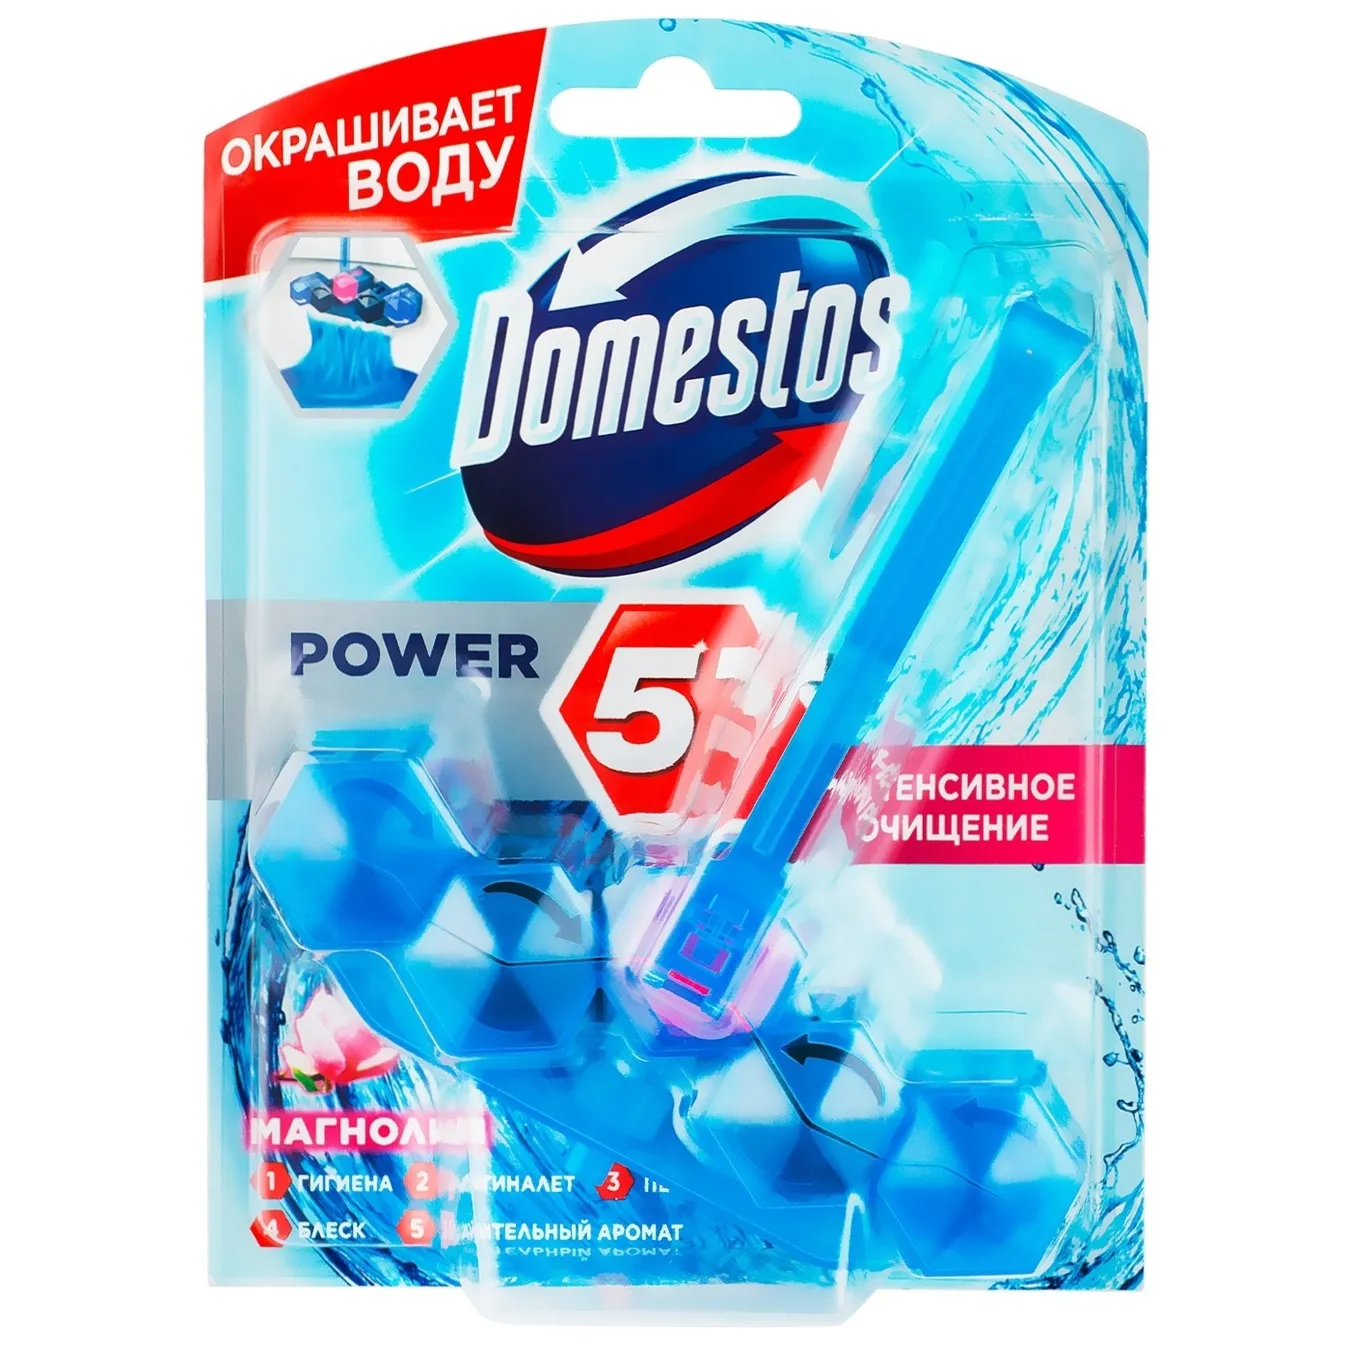 Domestos power 5 toilet cleaning block Visible Protection Flower bouquet 53g